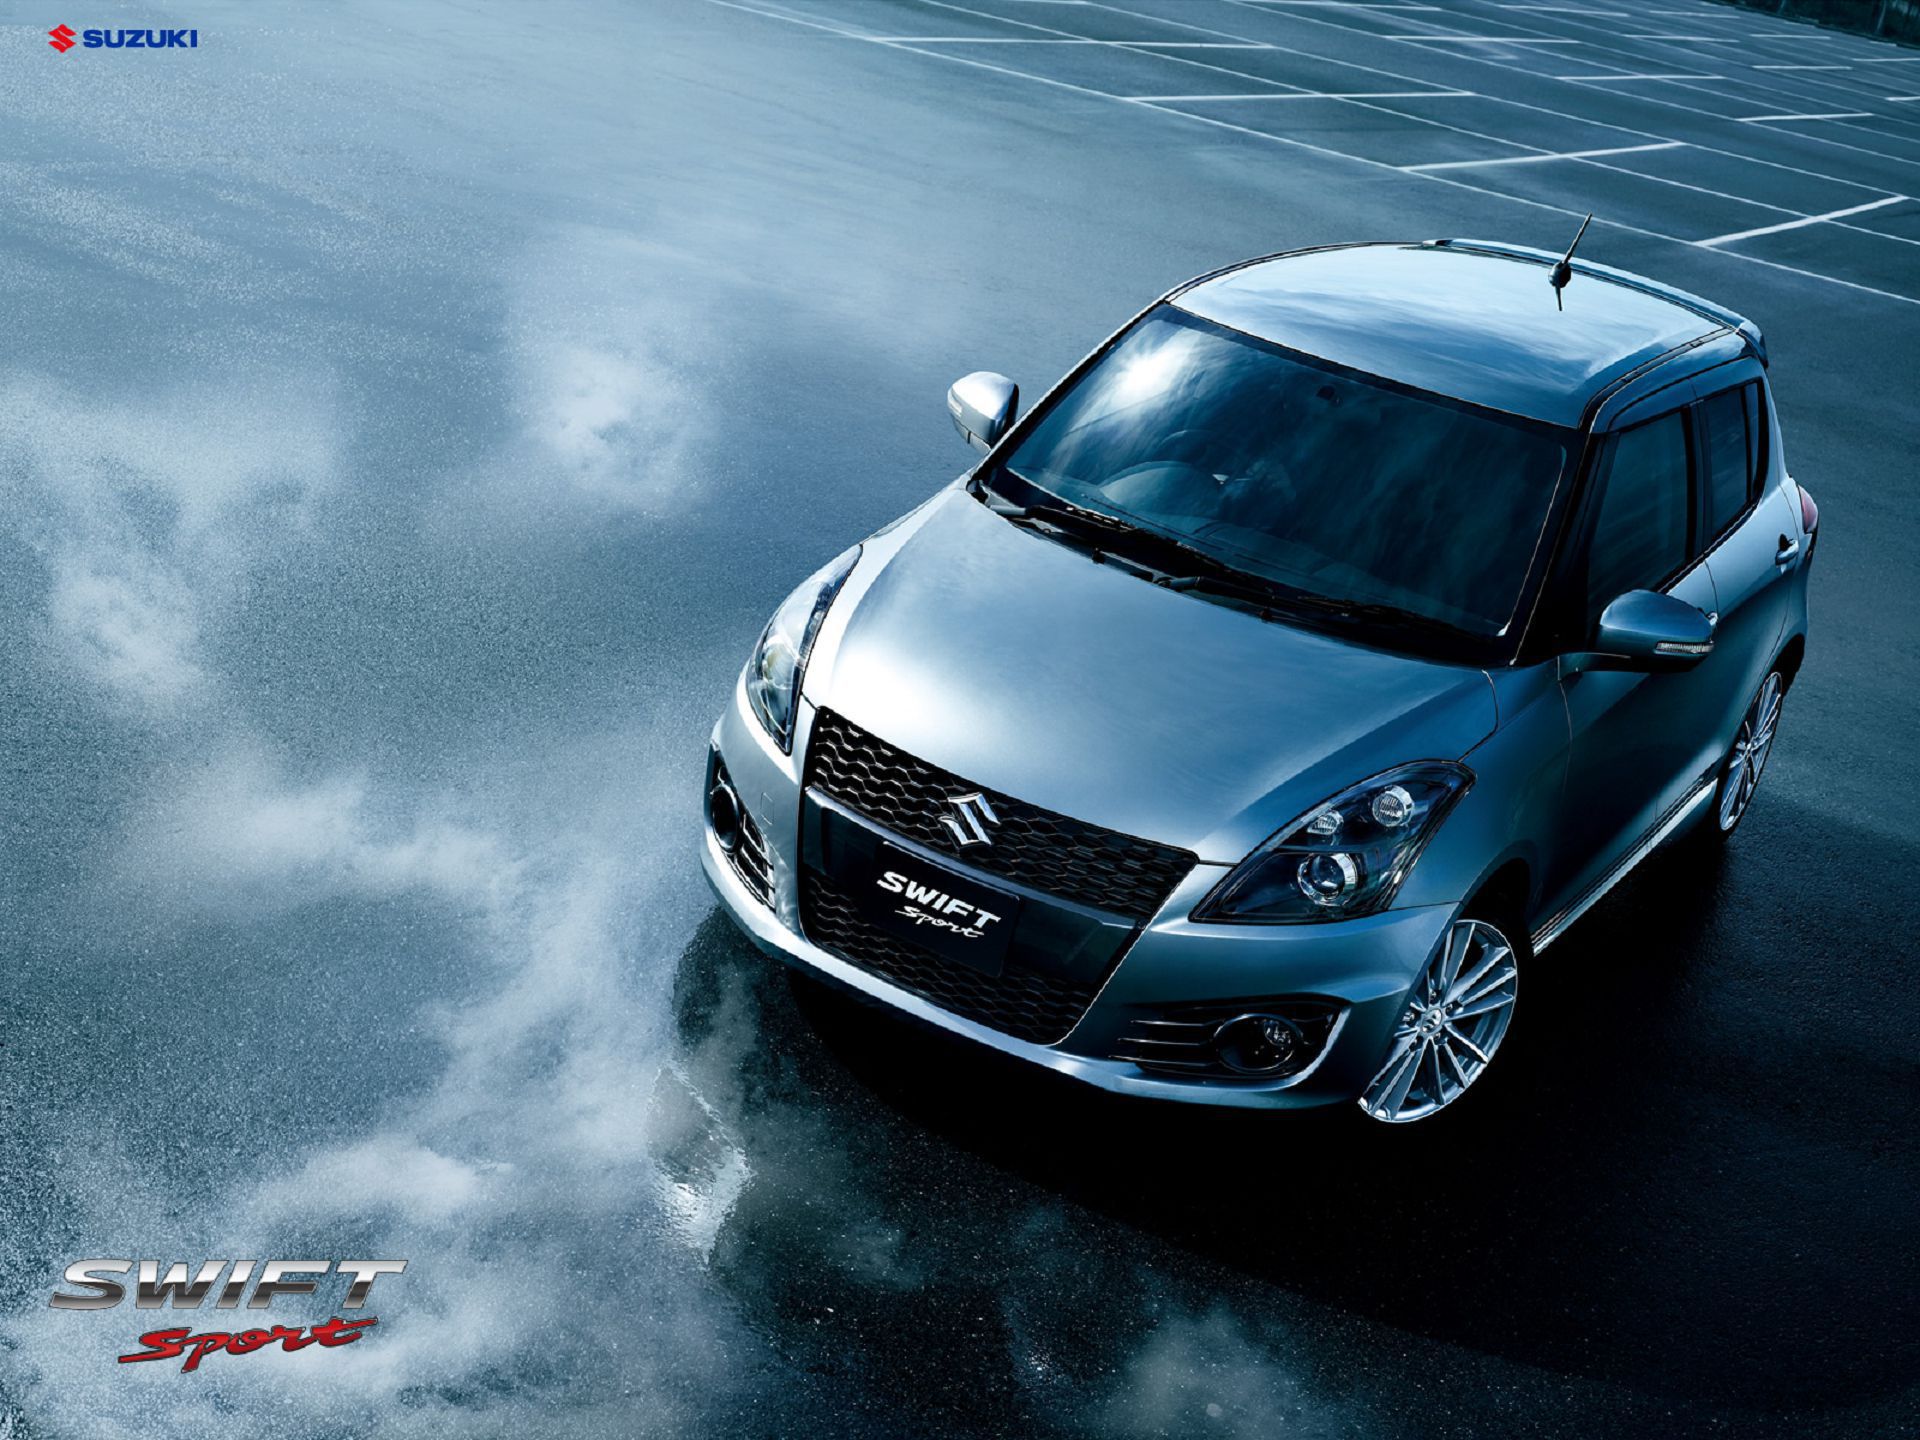 Suzuki Swift Sport Wallpapers Images Photos Pictures Backgrounds